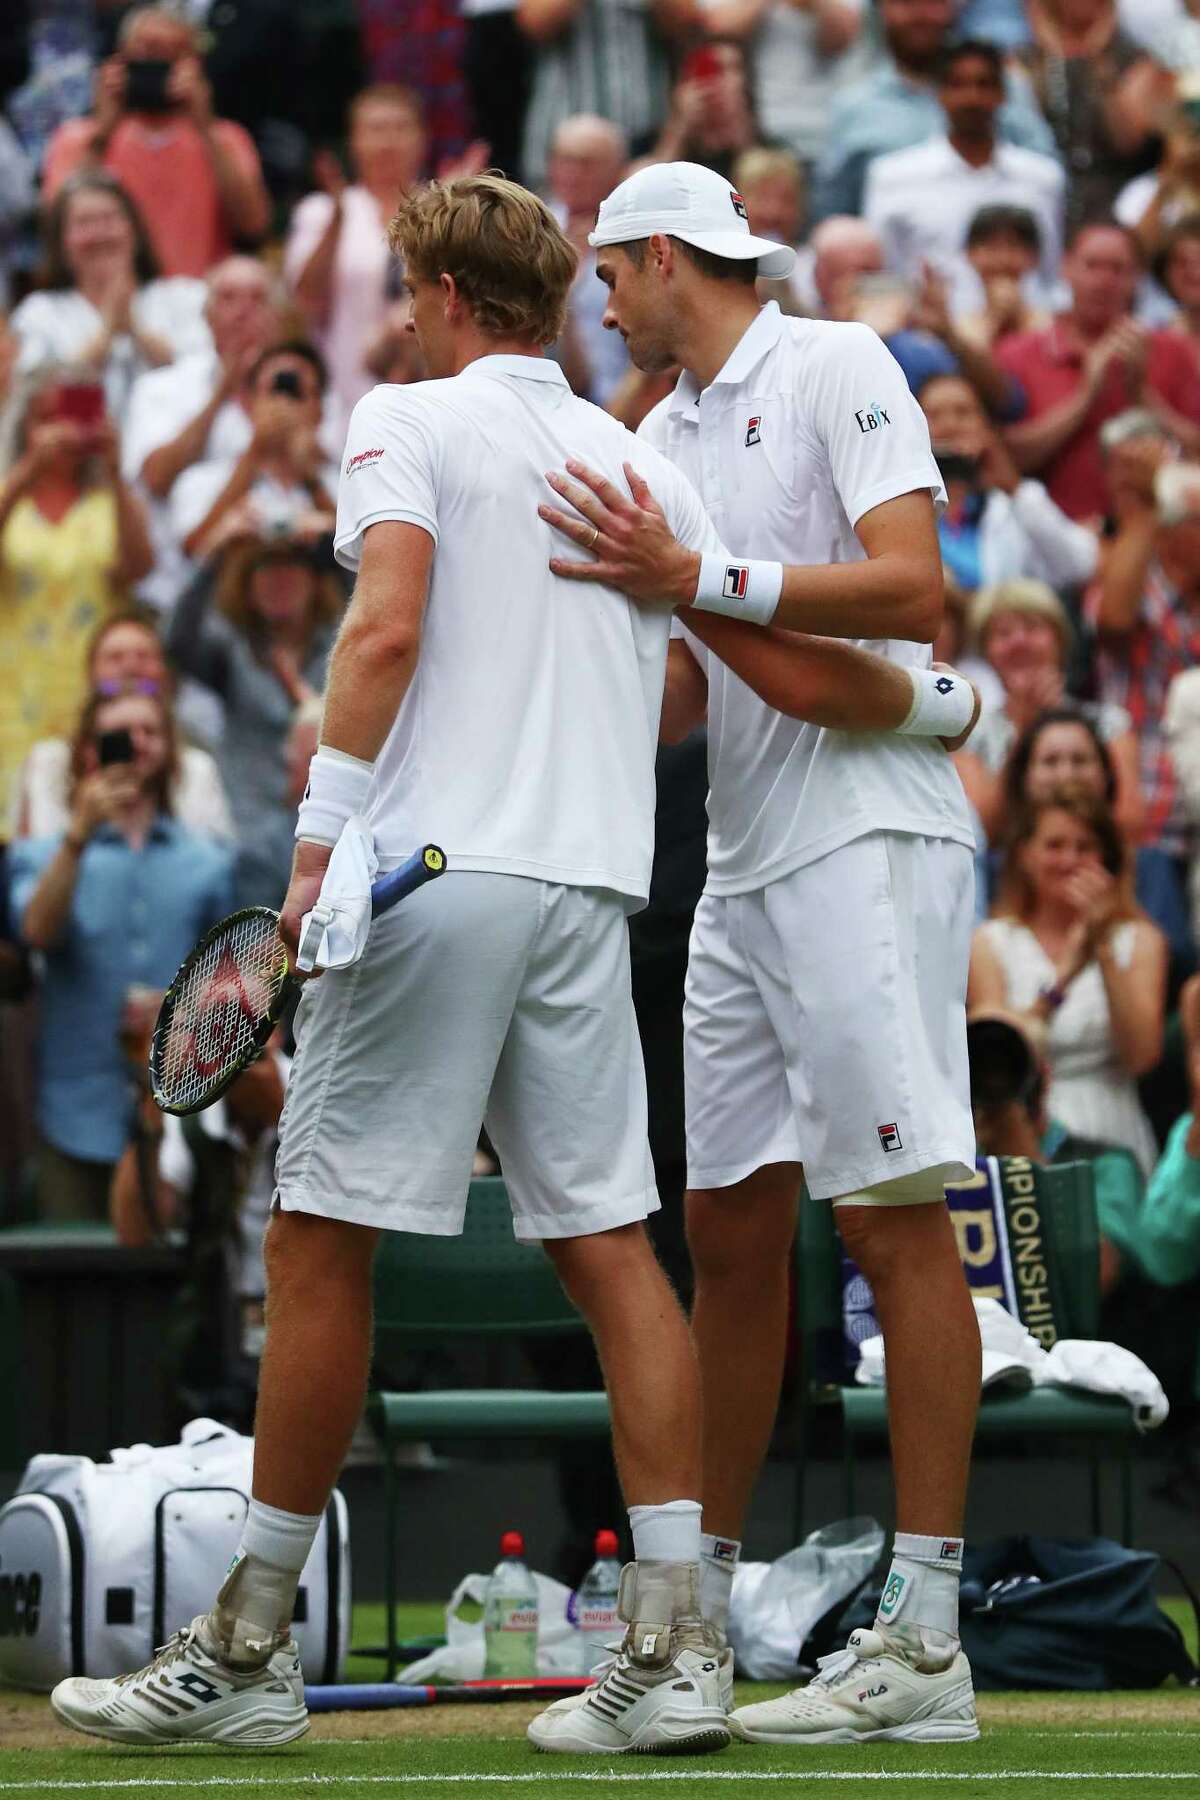 LONDON, ENGLAND - JULY 13: Kevin Anderson of South Africa (L) hugs John Isner of The United States after their Men's Singles semi-final match on day eleven of the Wimbledon Lawn Tennis Championships at All England Lawn Tennis and Croquet Club on July 13, 2018 in London, England.